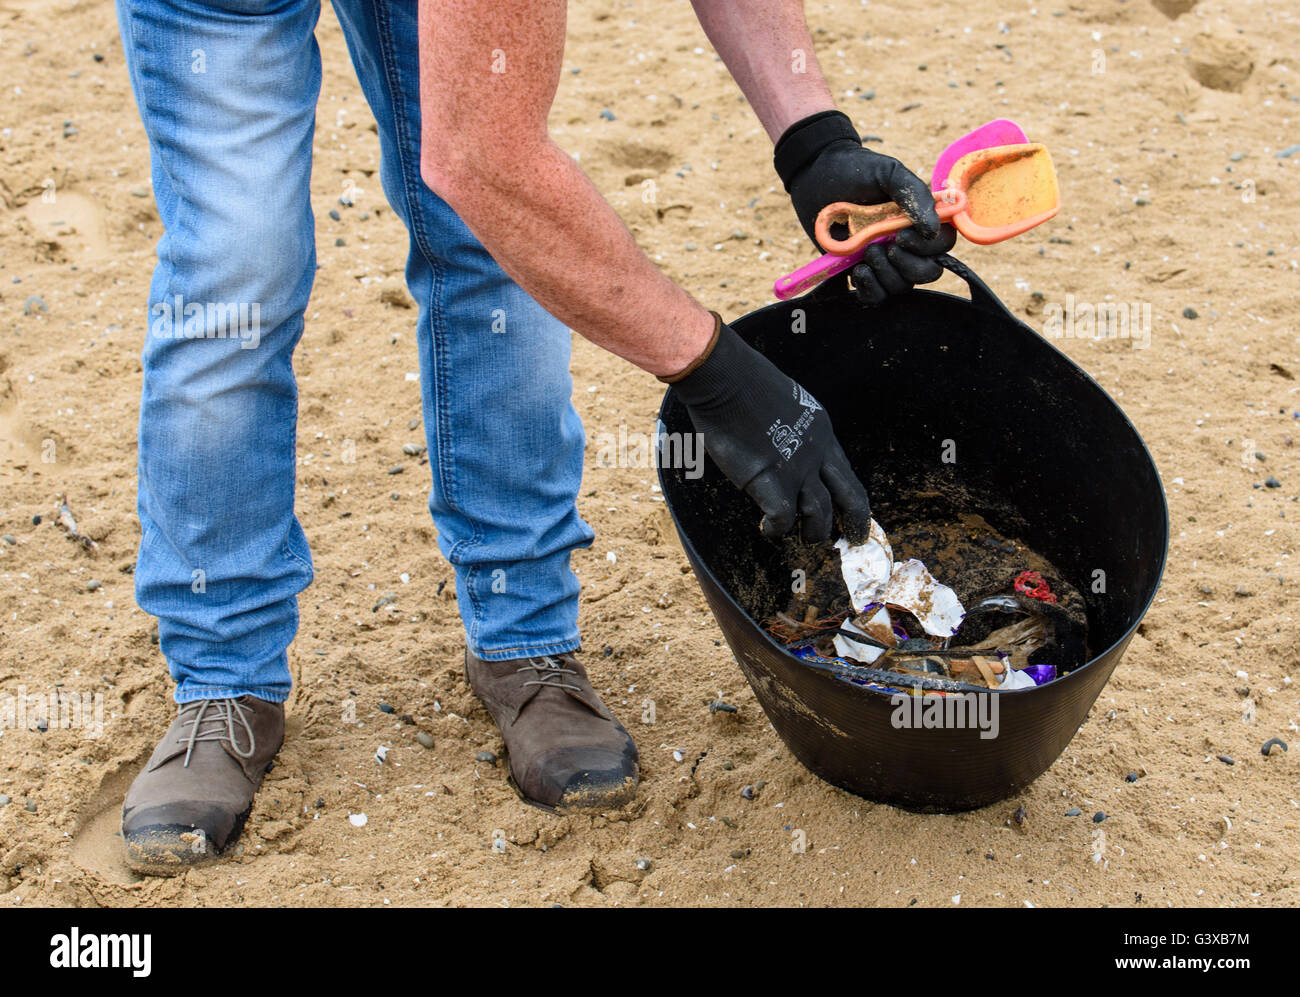 Image showing lower portion of man's body as he clears up litter from a sandy beach Stock Photo